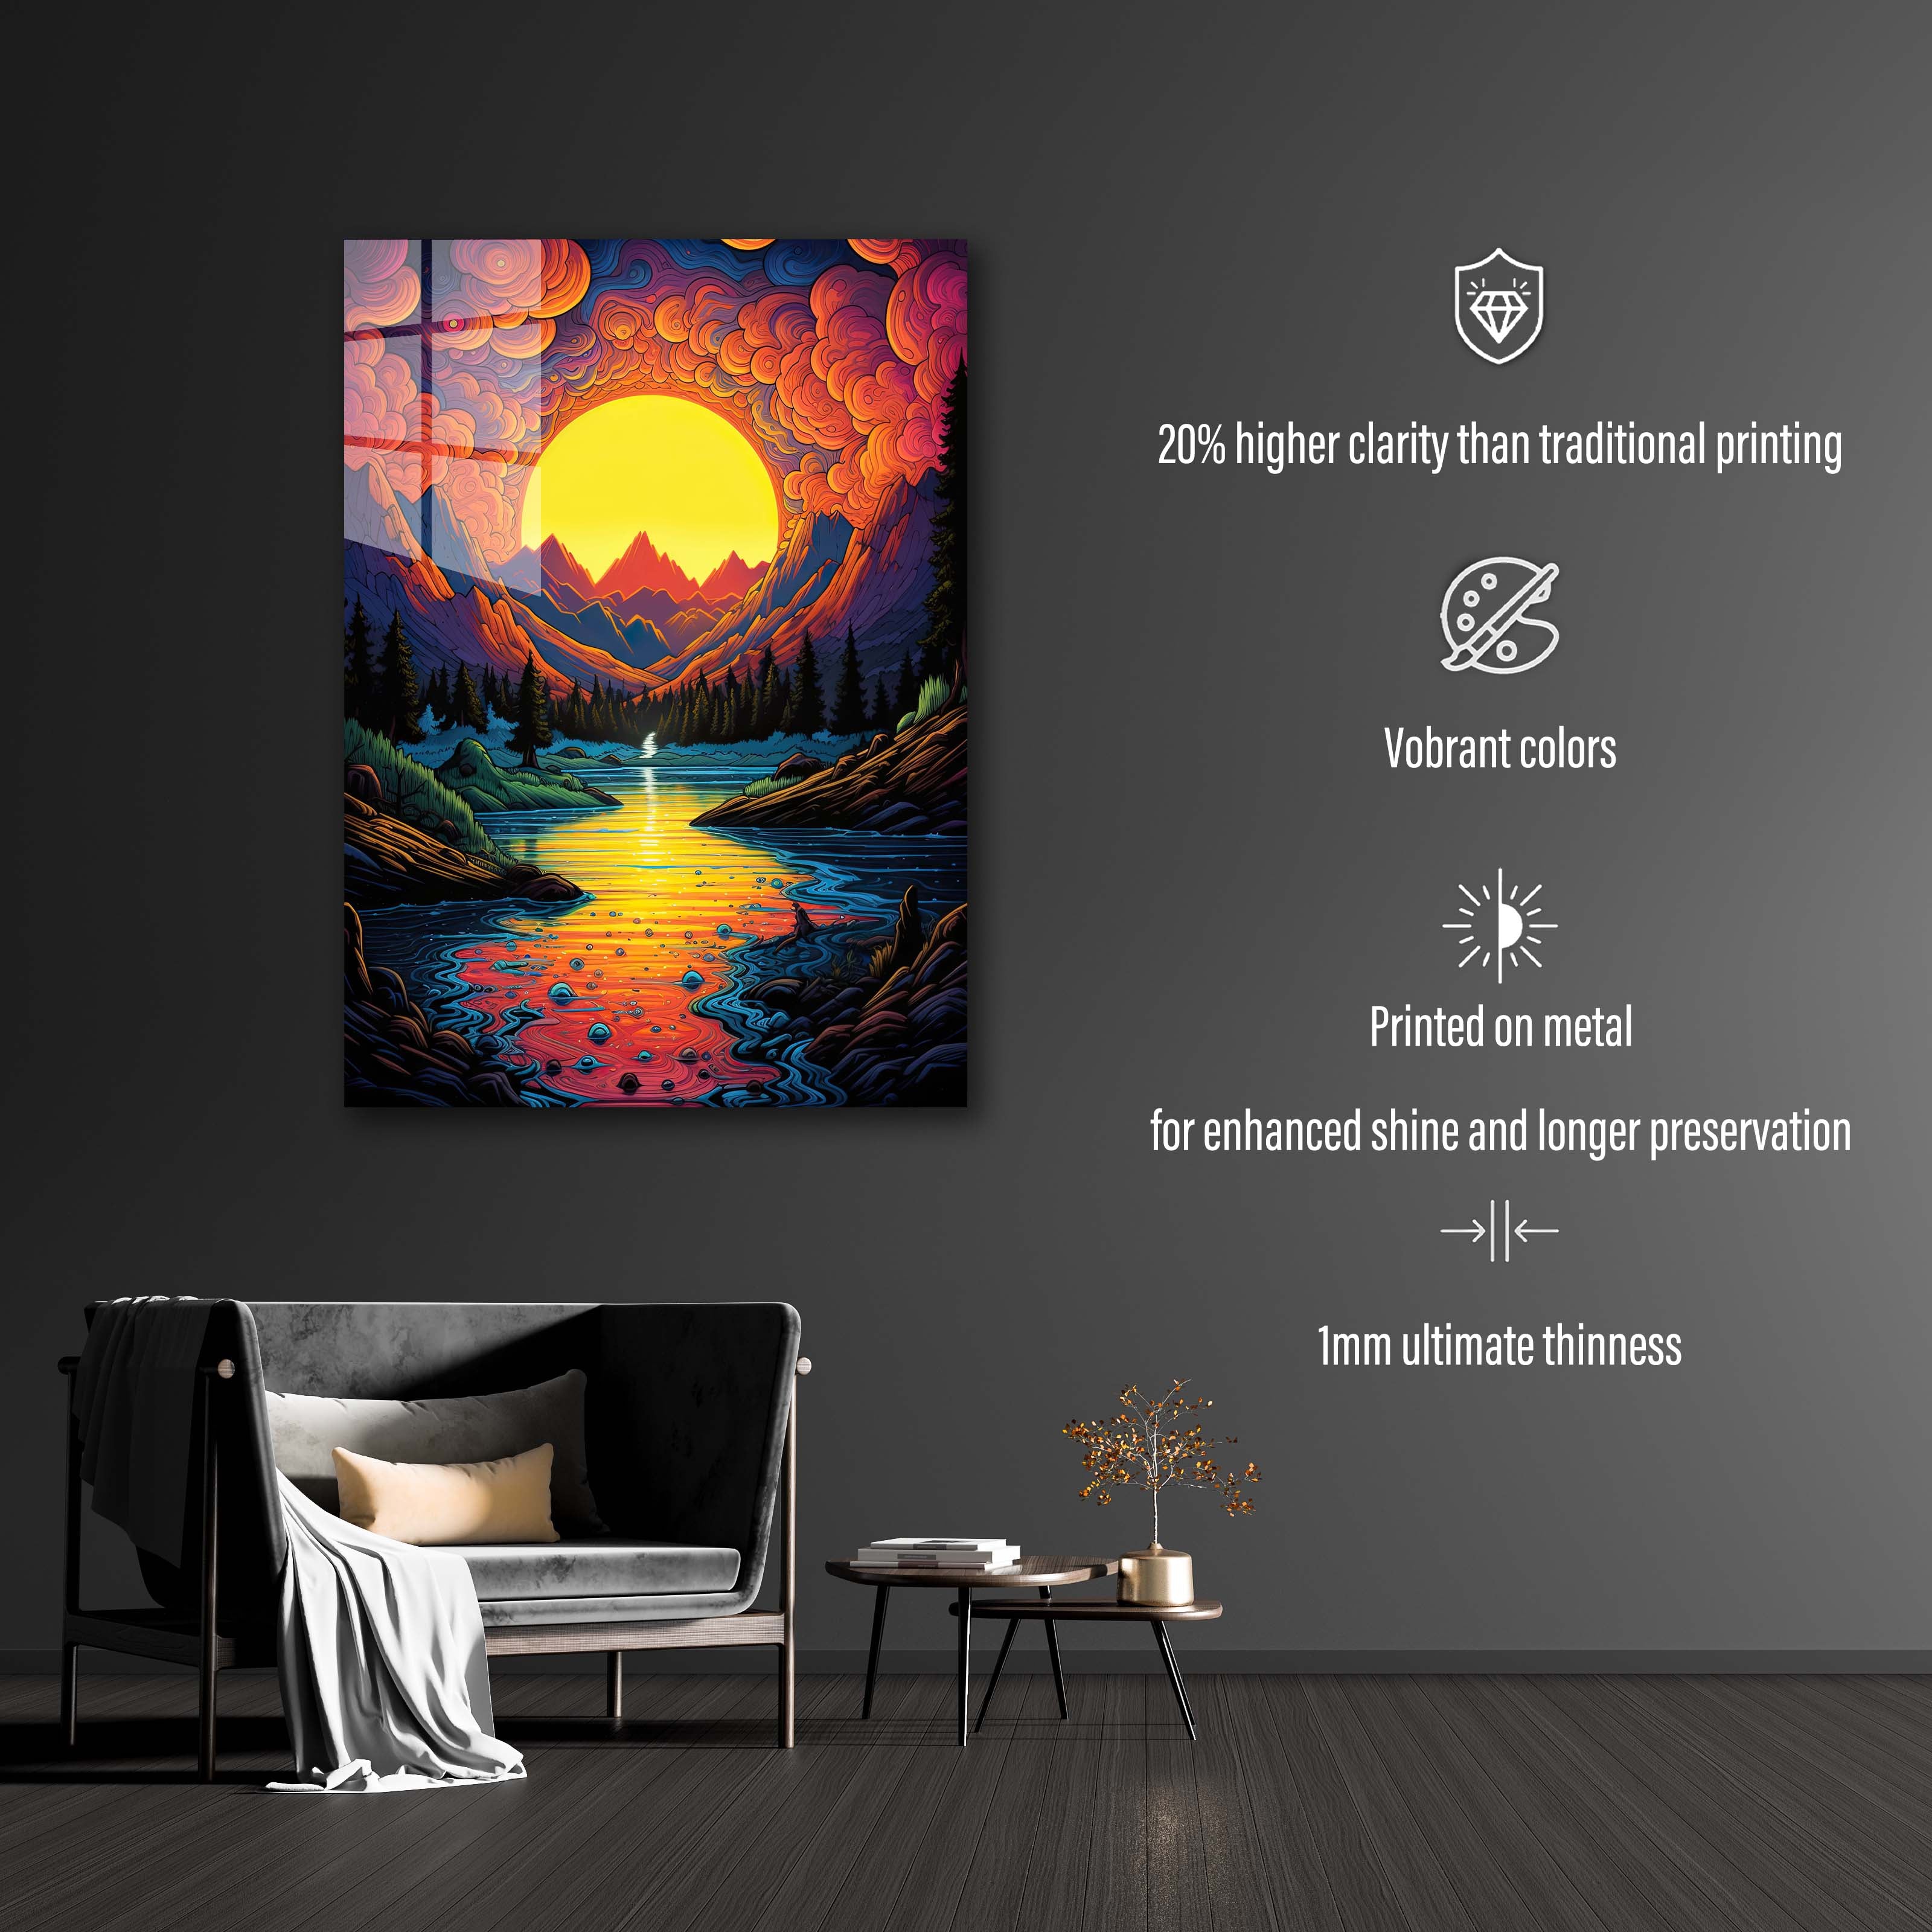 Sunlit Peaks_ Psychedelic Reflections and Mythic Symbolism-designed by @Da vinci Ai Art